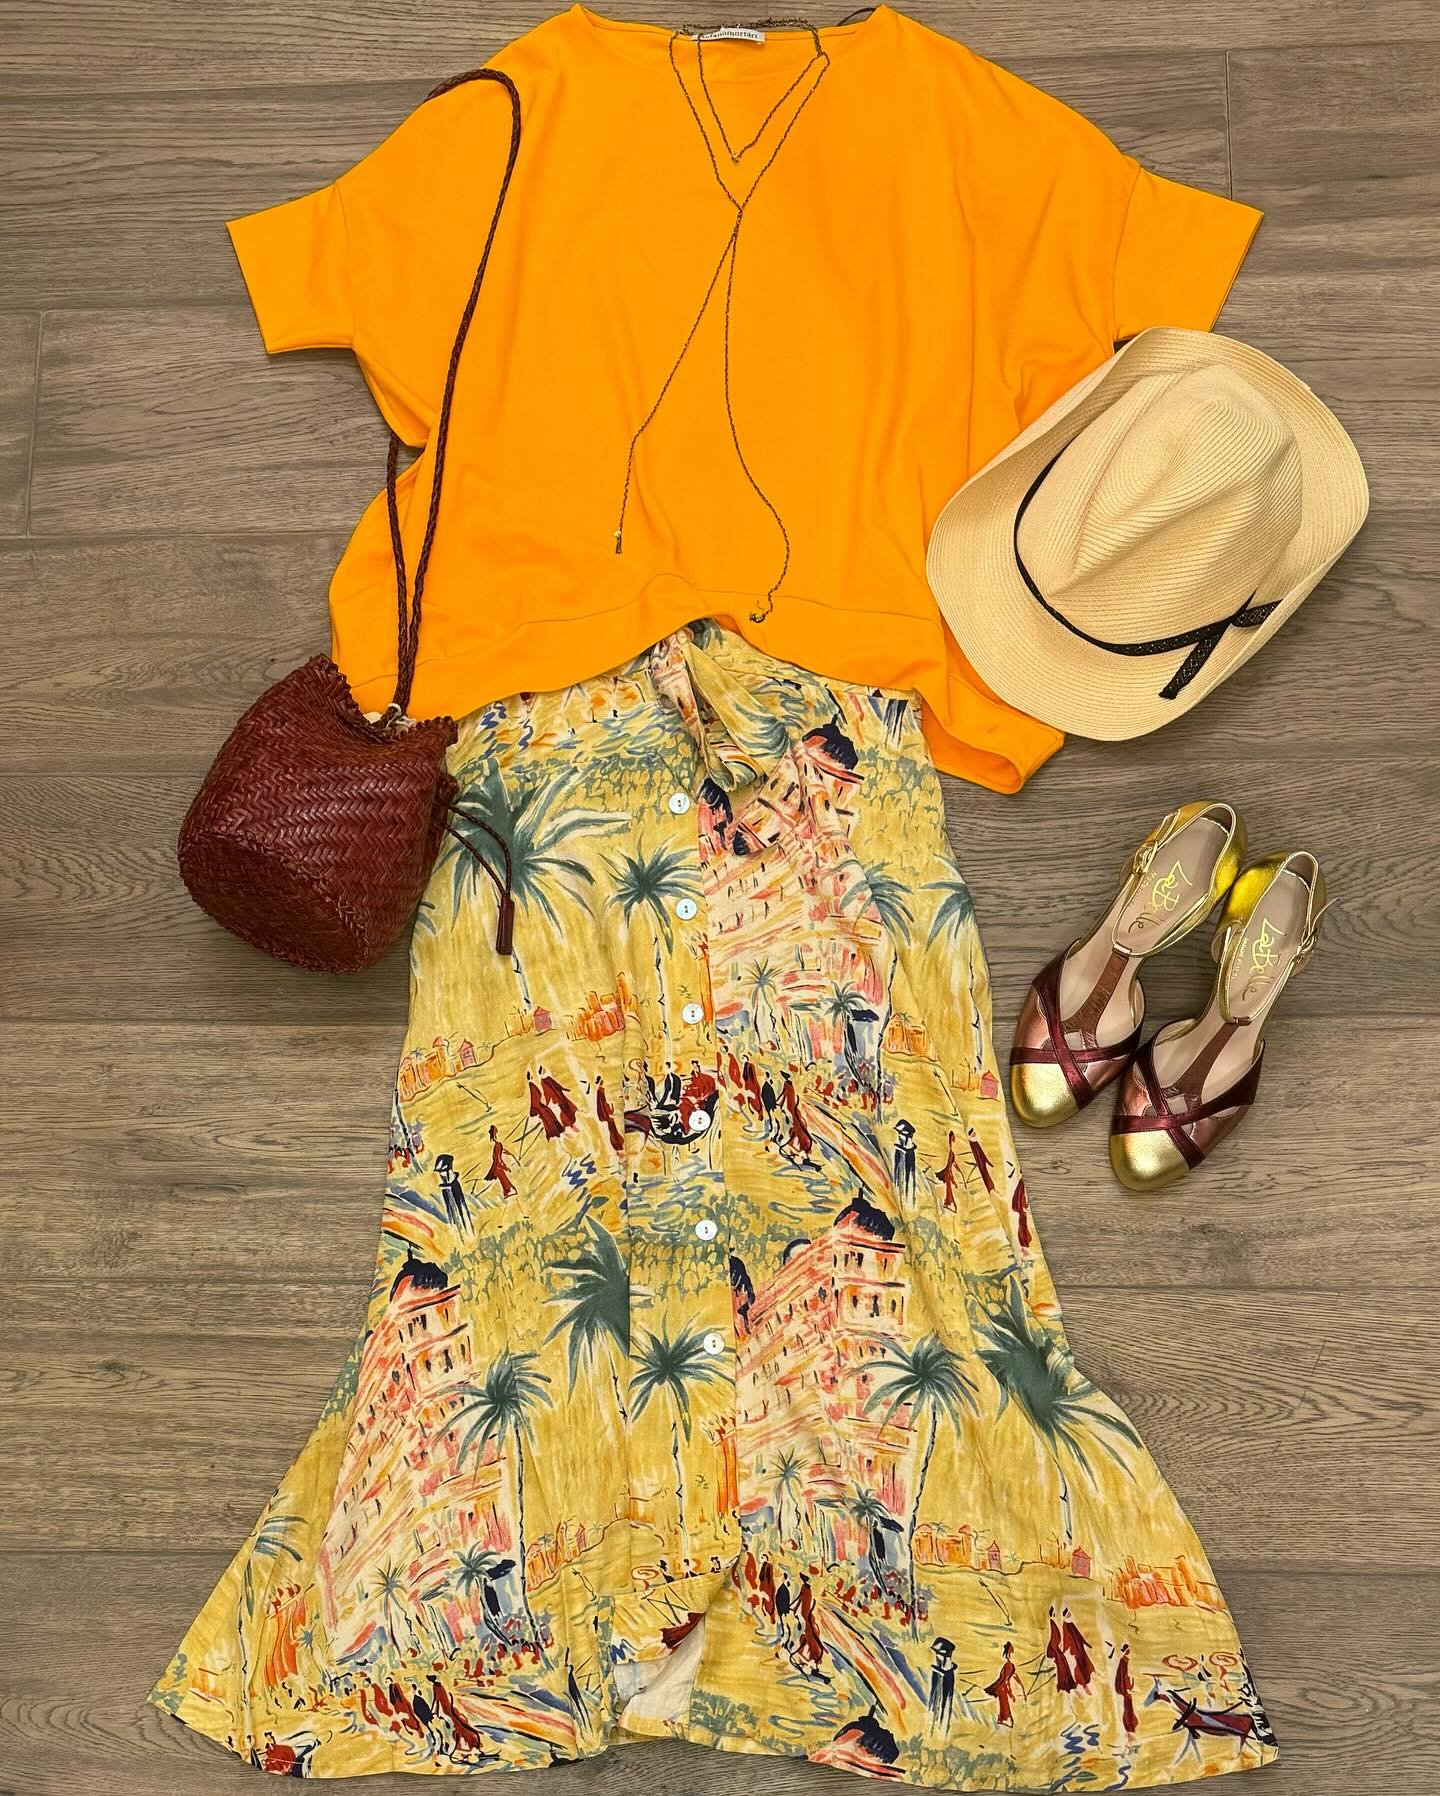 Weekend spring outfit ispiration!
Come to check our special outfit for summer ☀️
Also online in our website (link in bio)
.
.
.
#vicodeibolognesi #vicodeibolognesidaily #vicodeibolognesioutfit #vicodeibolognesifamily #outfit #outfitoftheday #outfitin